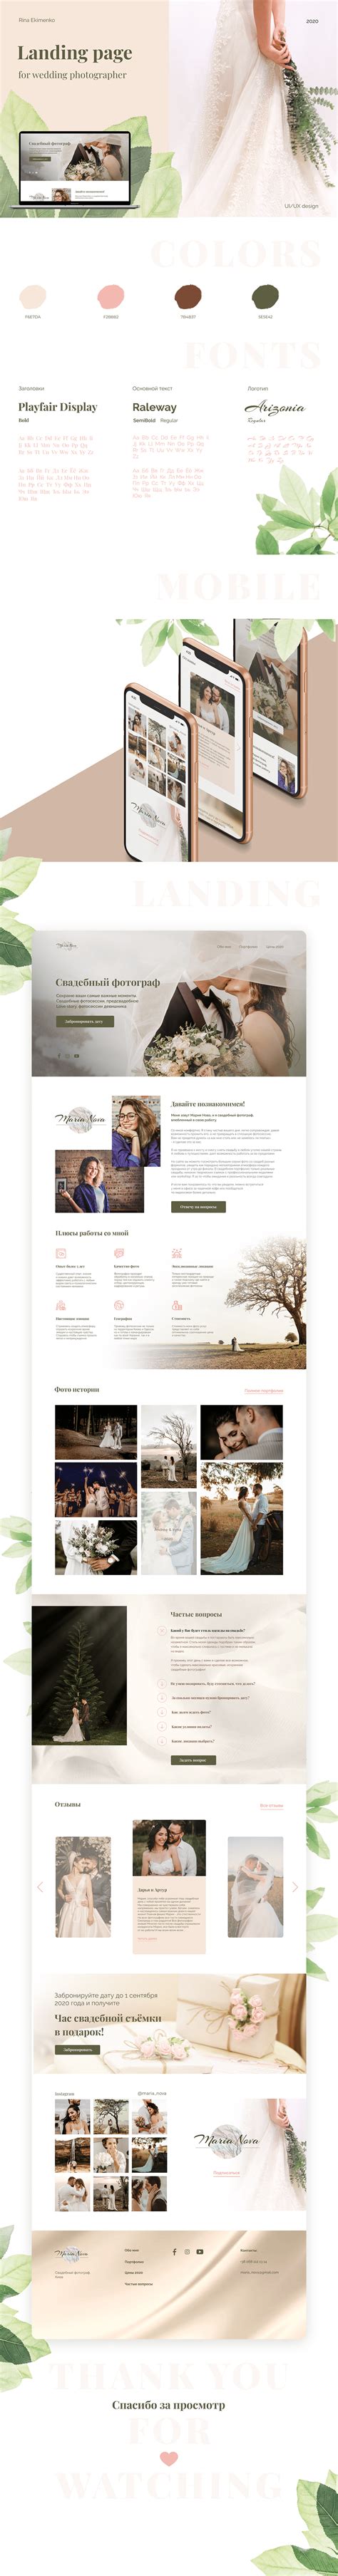 This wedding photography contract is perfect for freelance photographers or photography agencies looking for a solid contract to put in place this contract template can be customized in seconds, thanks to pandadoc's token fields. Wedding photographer | Landing page on Behance